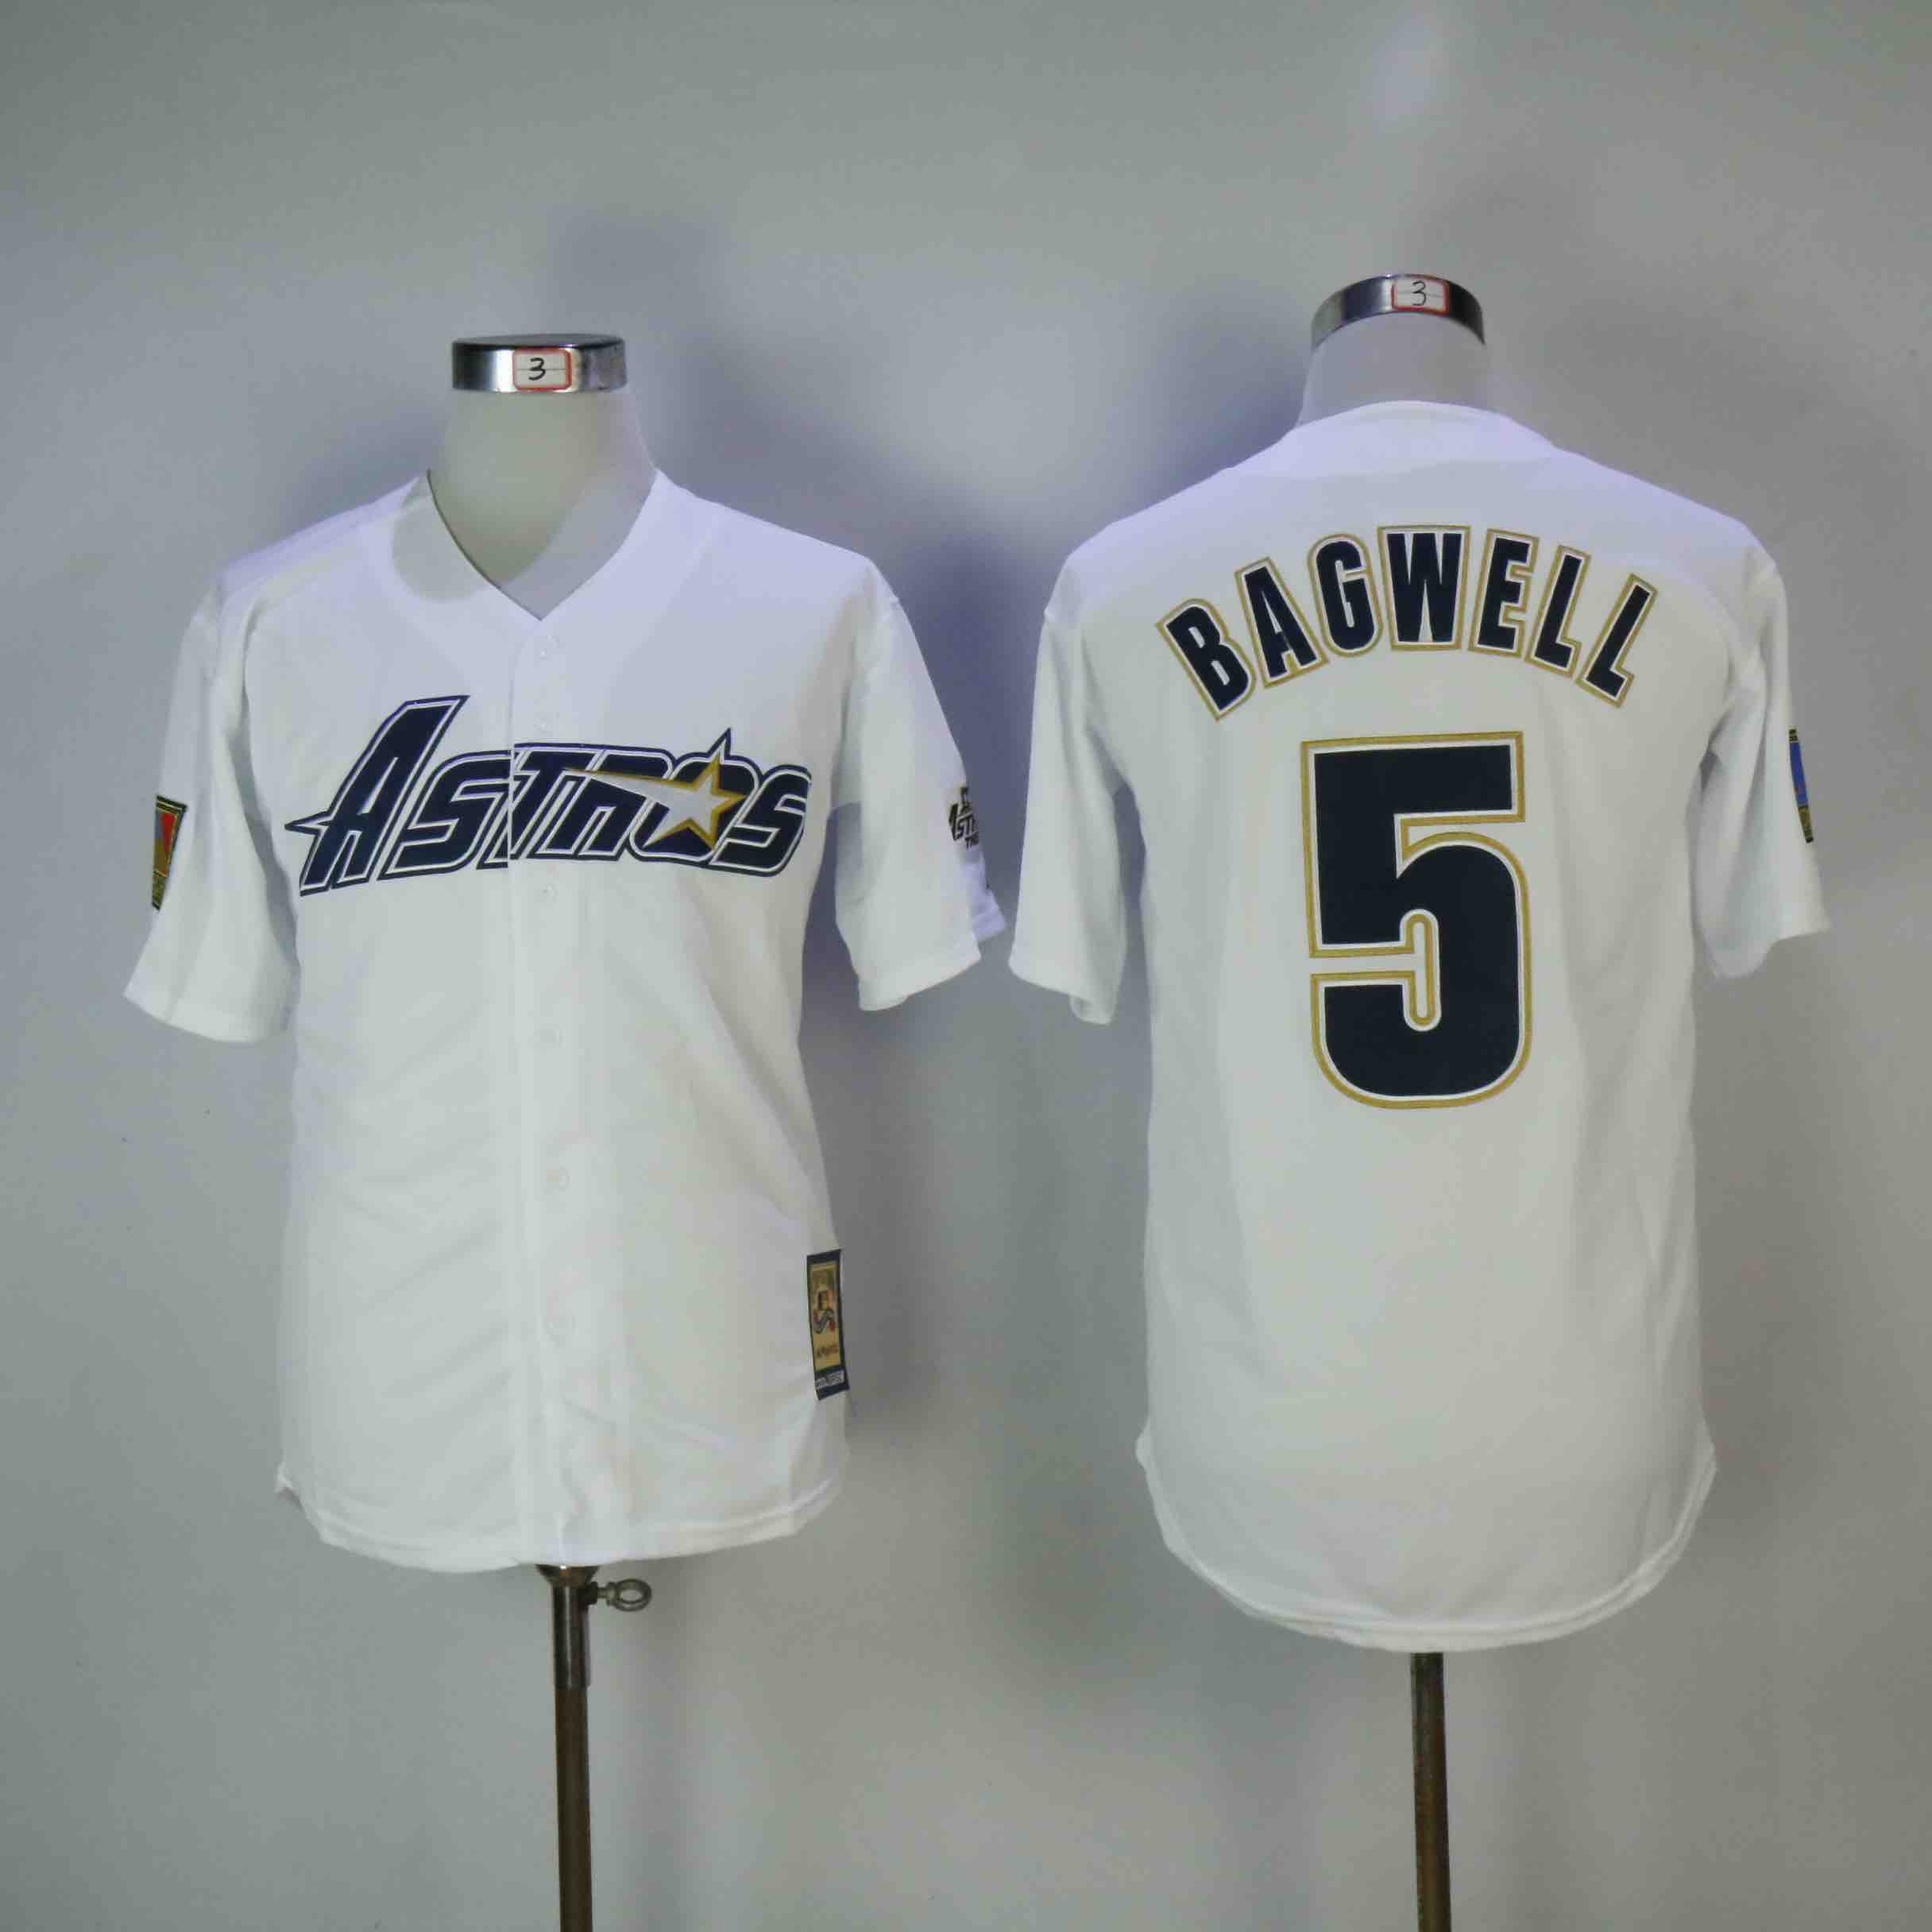 MLB Houston Astros #5 Bagwell White Throwback Jersey